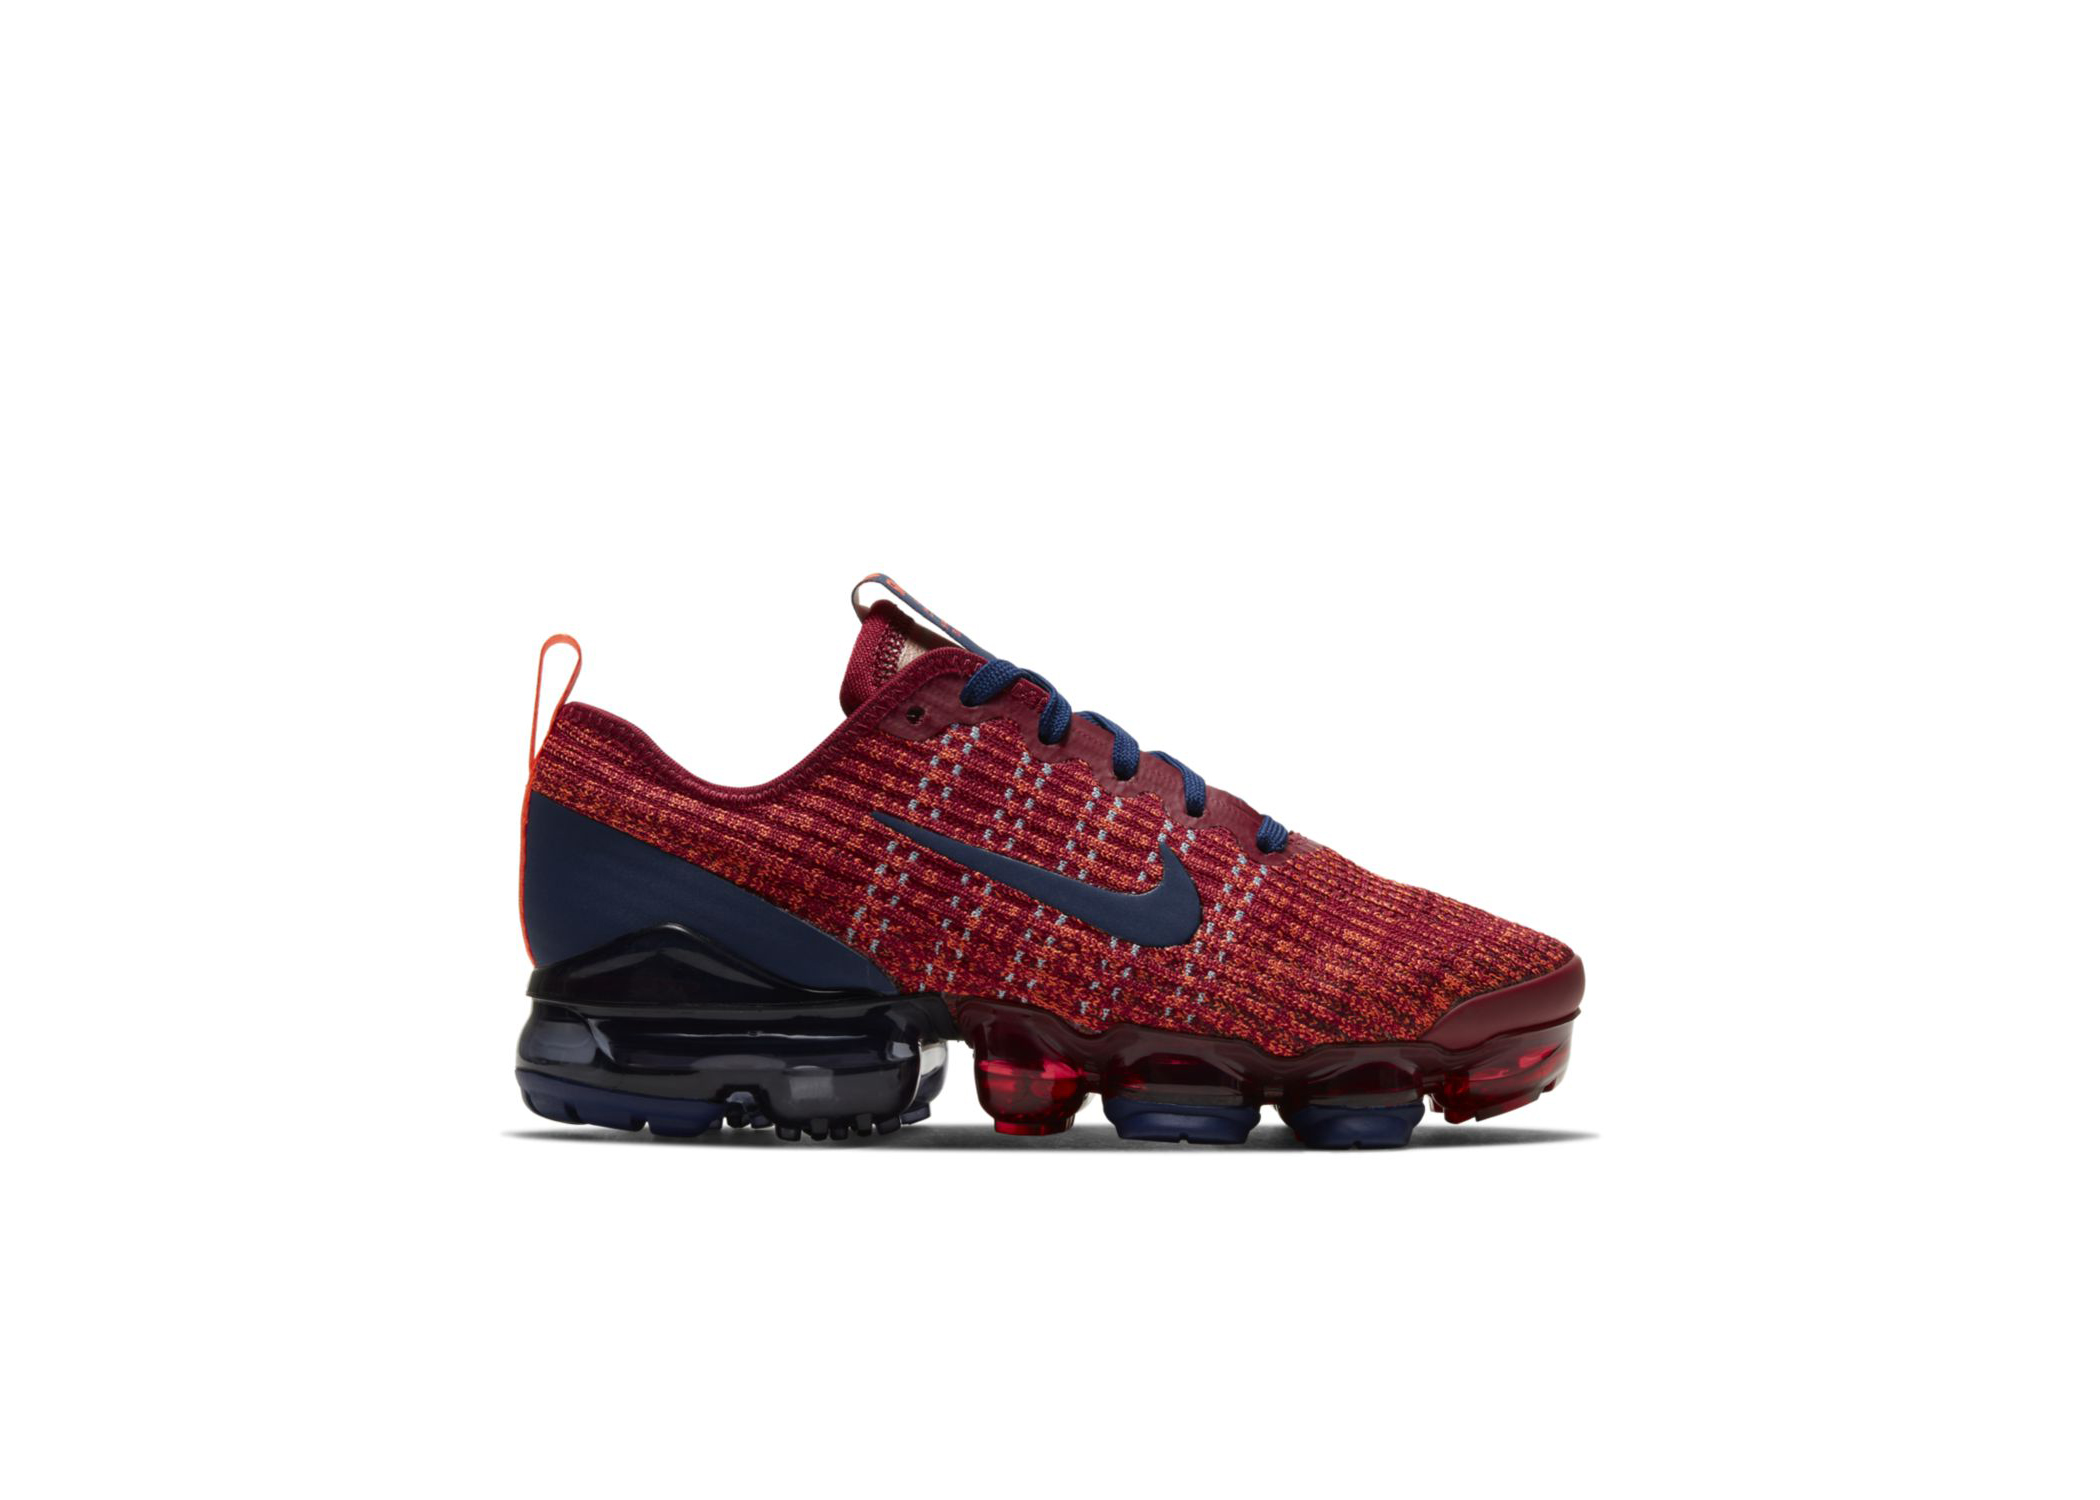 vapormax flyknit noble red